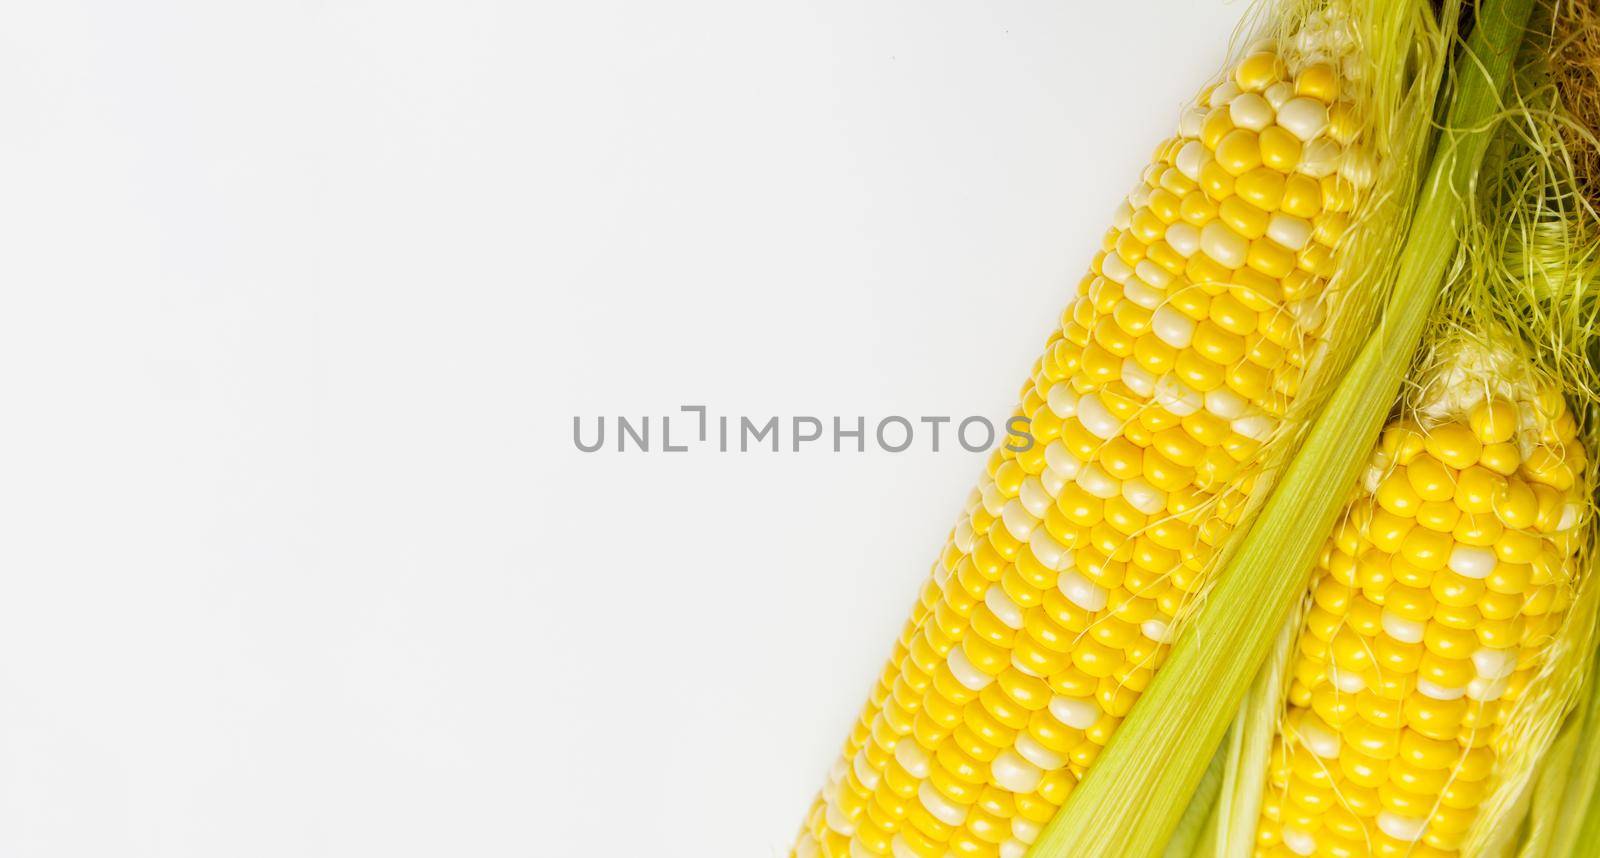 Grains of Ripe Corn with Water Droplets. Extreme Macro. Isolated with copy space for text by InnaVlasova